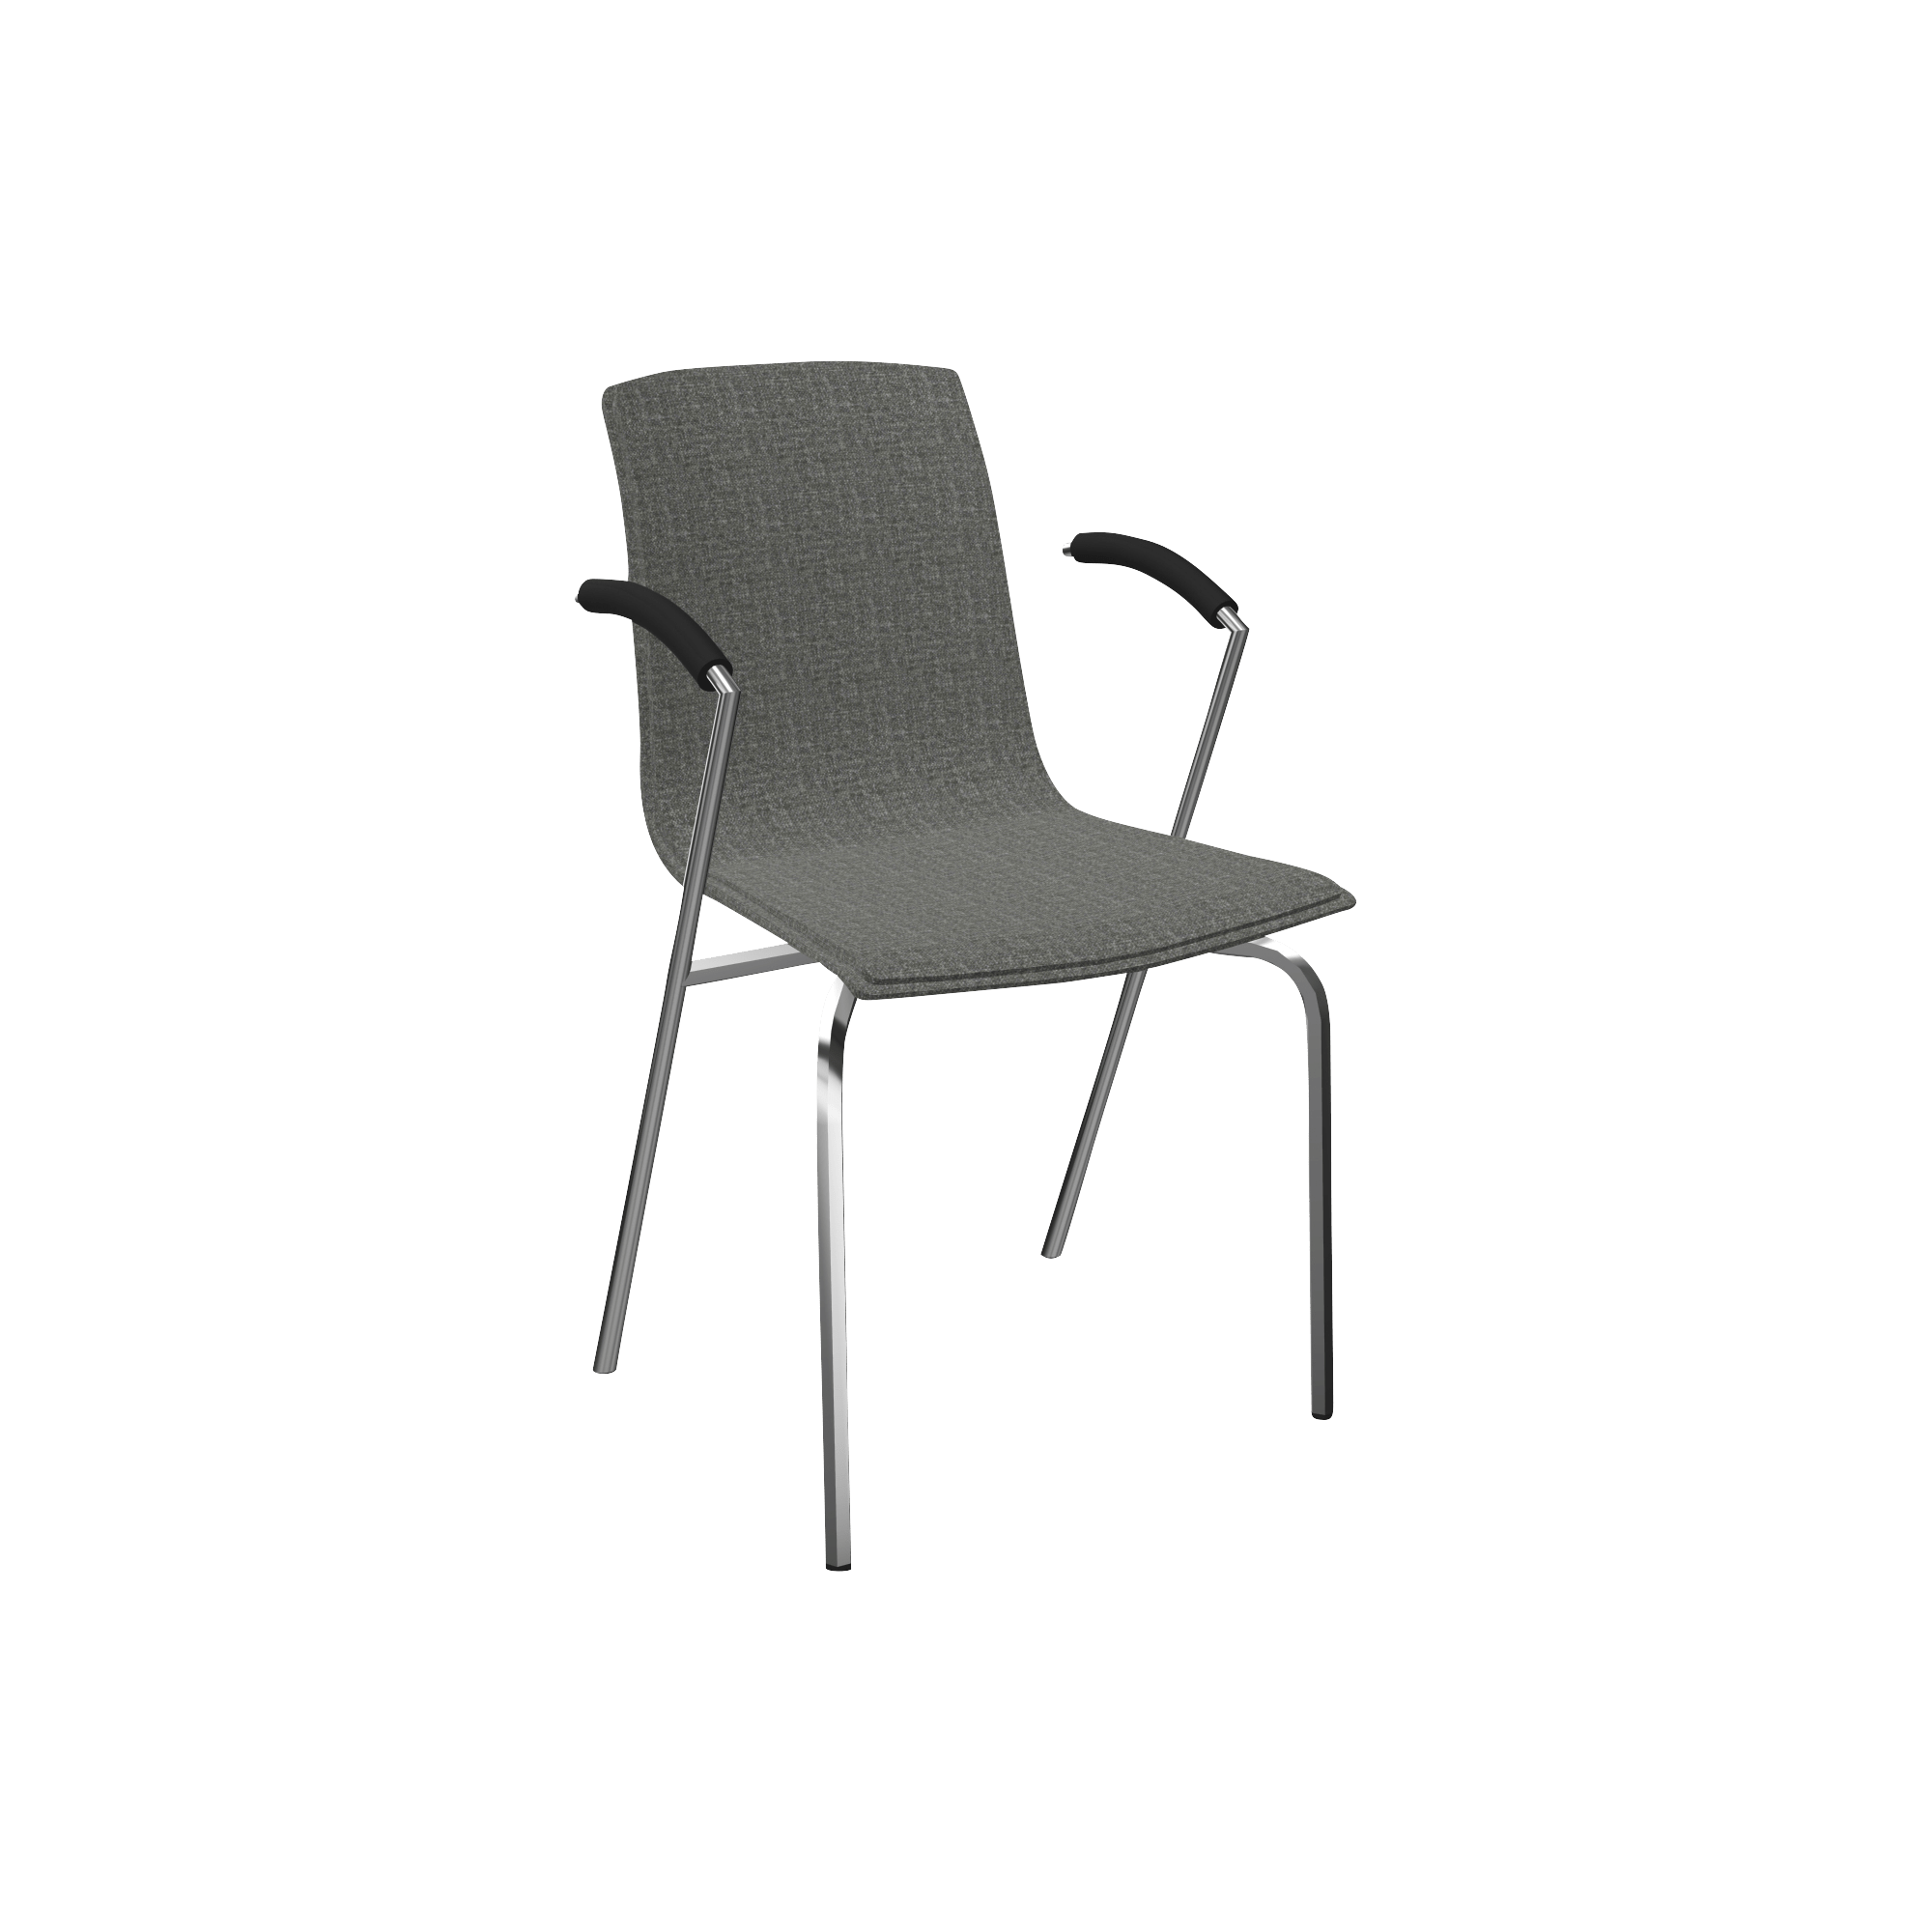 Grey chair with arm rests and four chrome legs